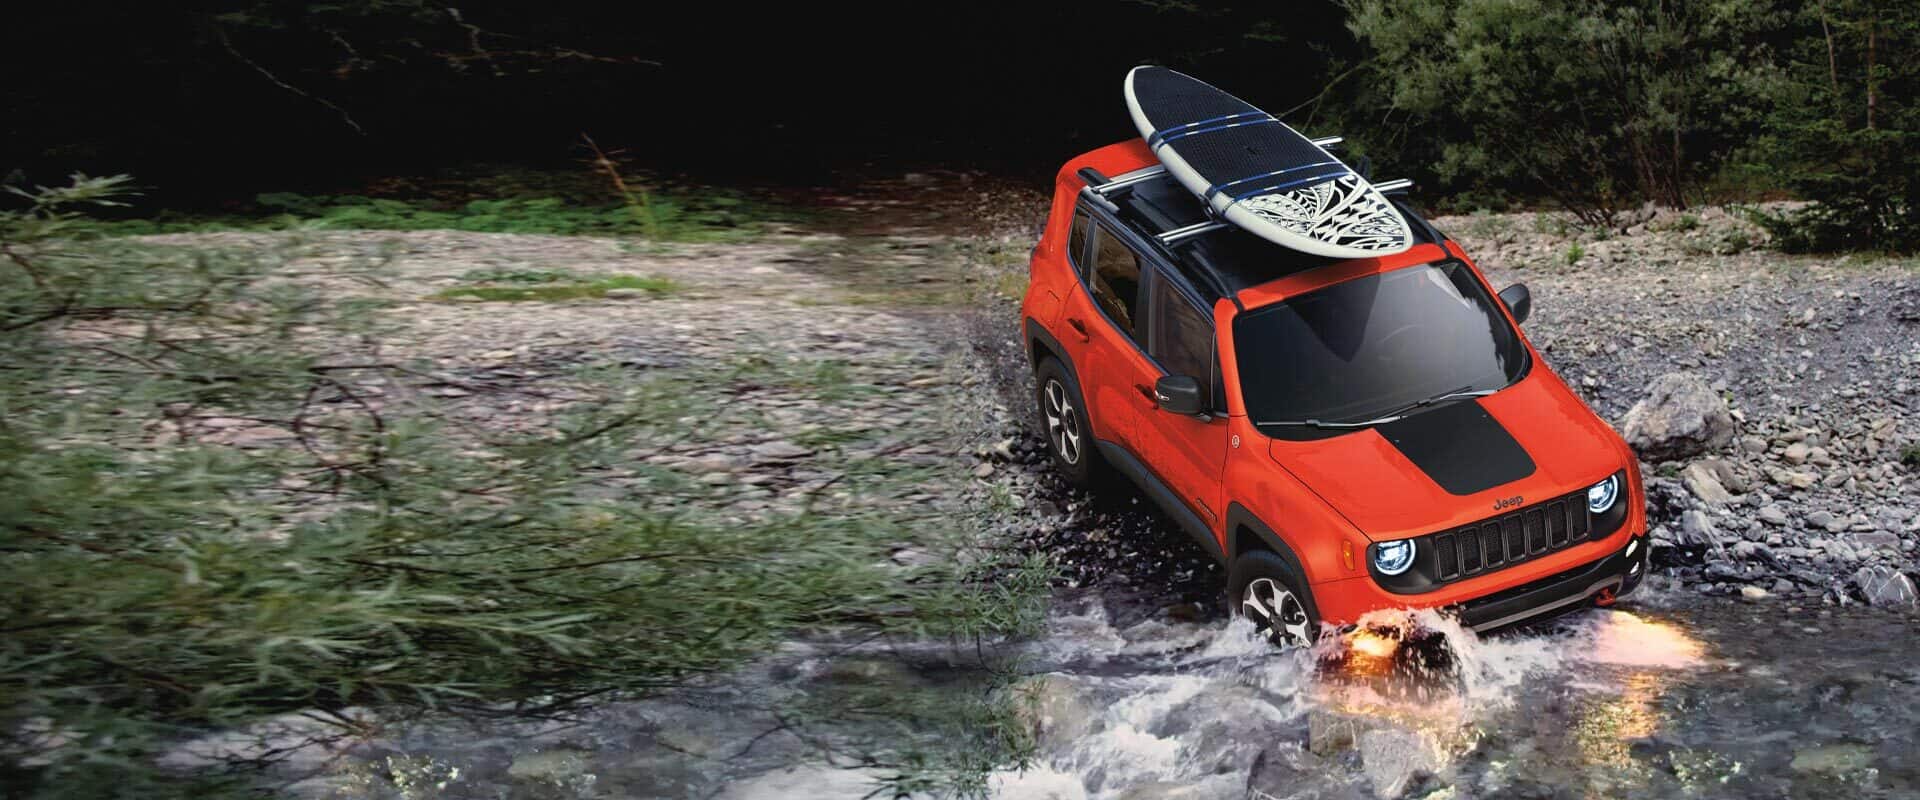 The 2021 Jeep Renegade fording a shallow stream with a surfboard attached to its roof rack.